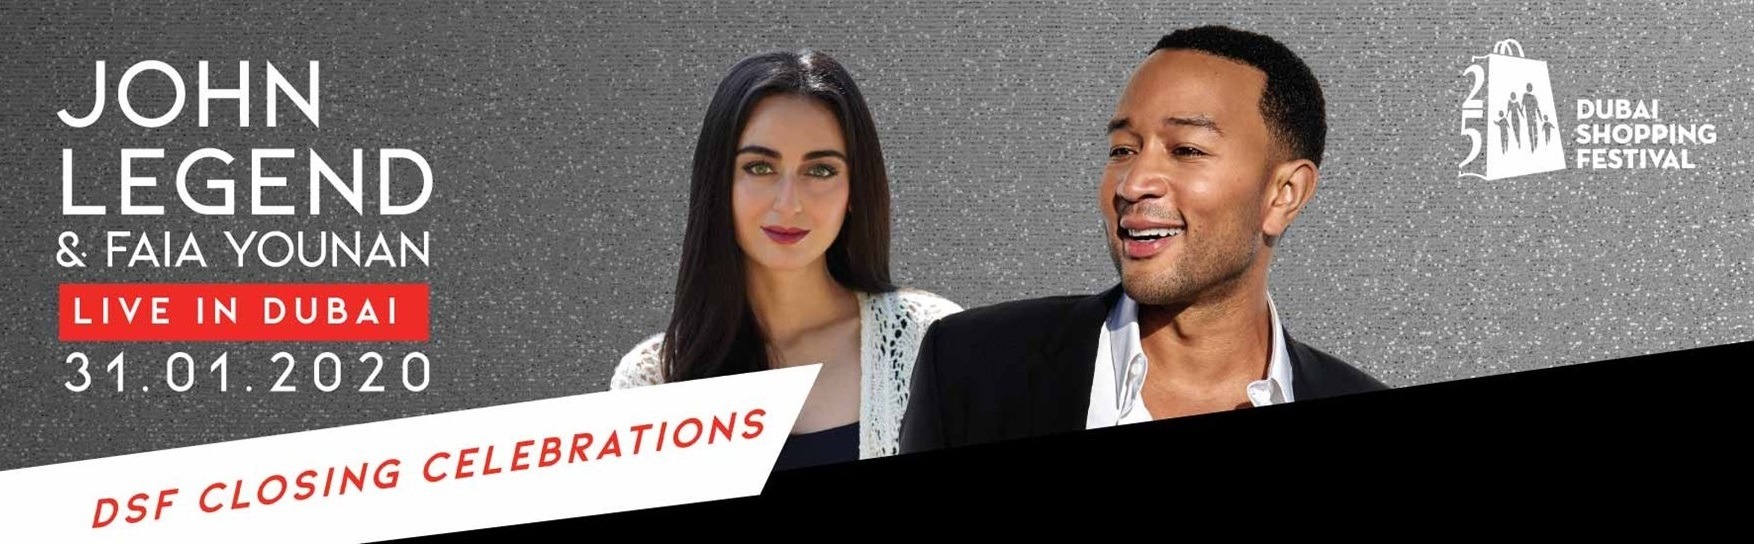 DSF Clothing Celebration: John Legend and Faia Younan - Coming Soon in UAE